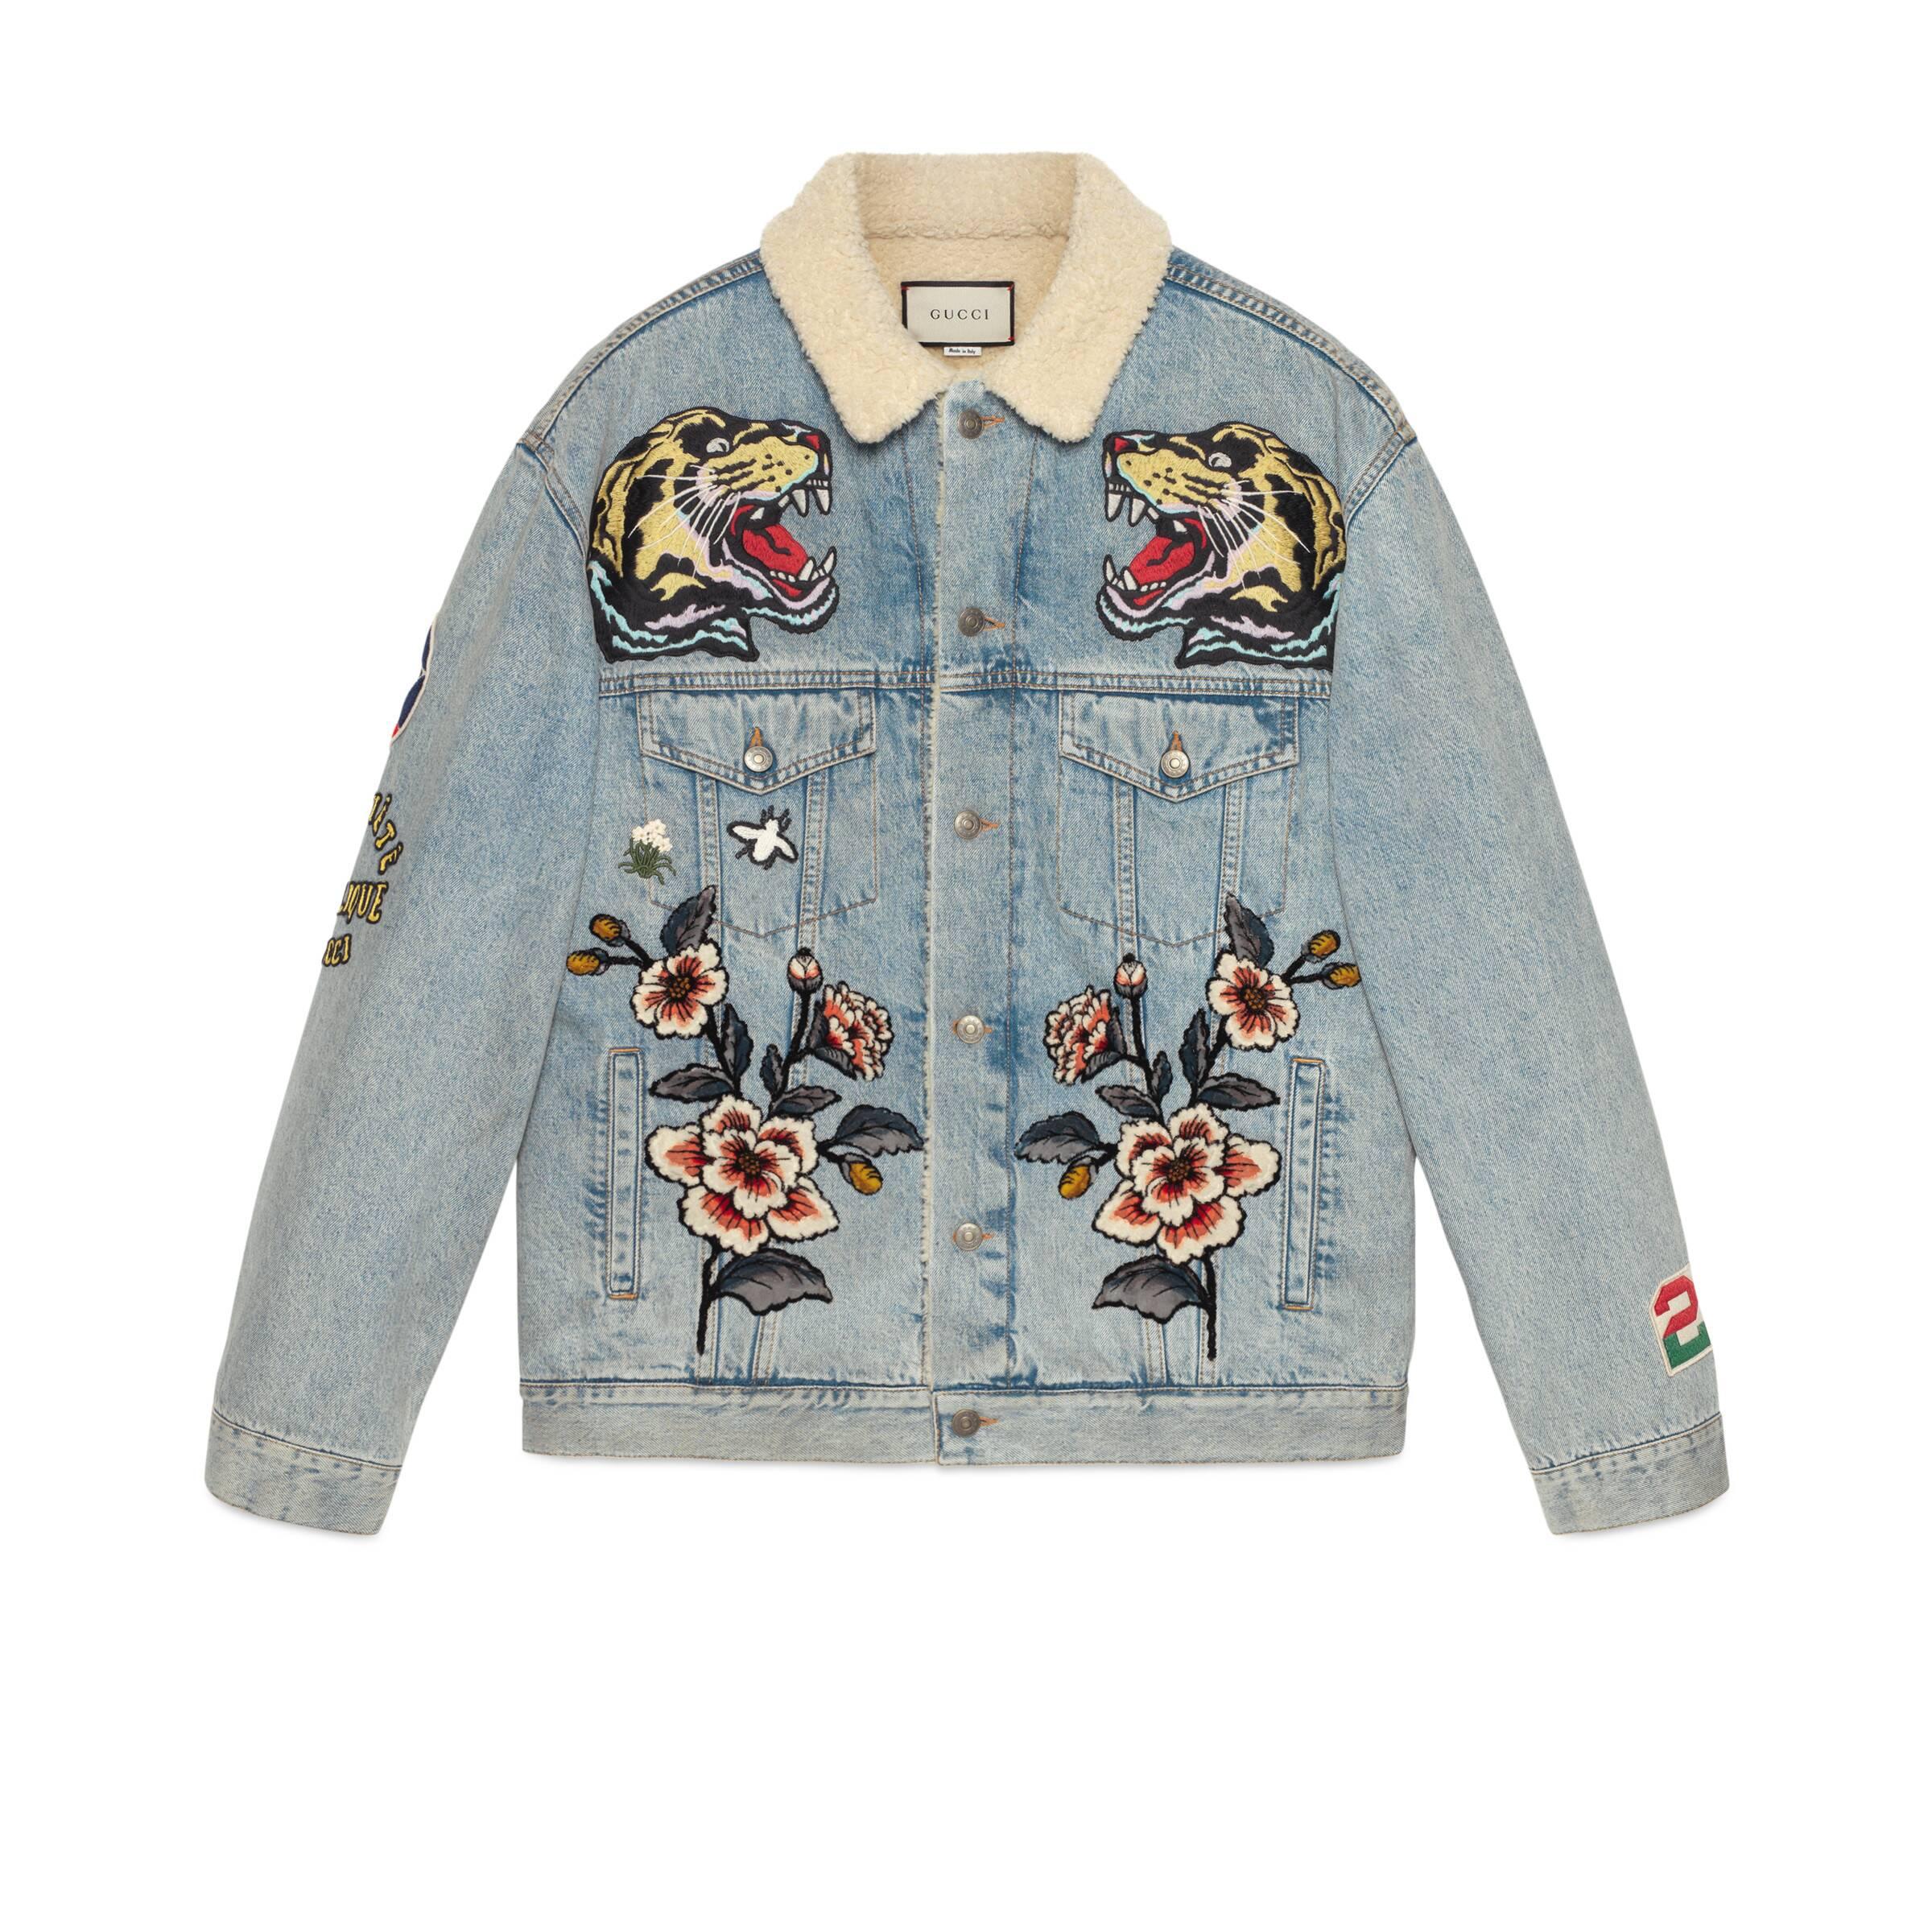 Gucci Oversize Denim Jacket With Patches in Blue for Men - Lyst